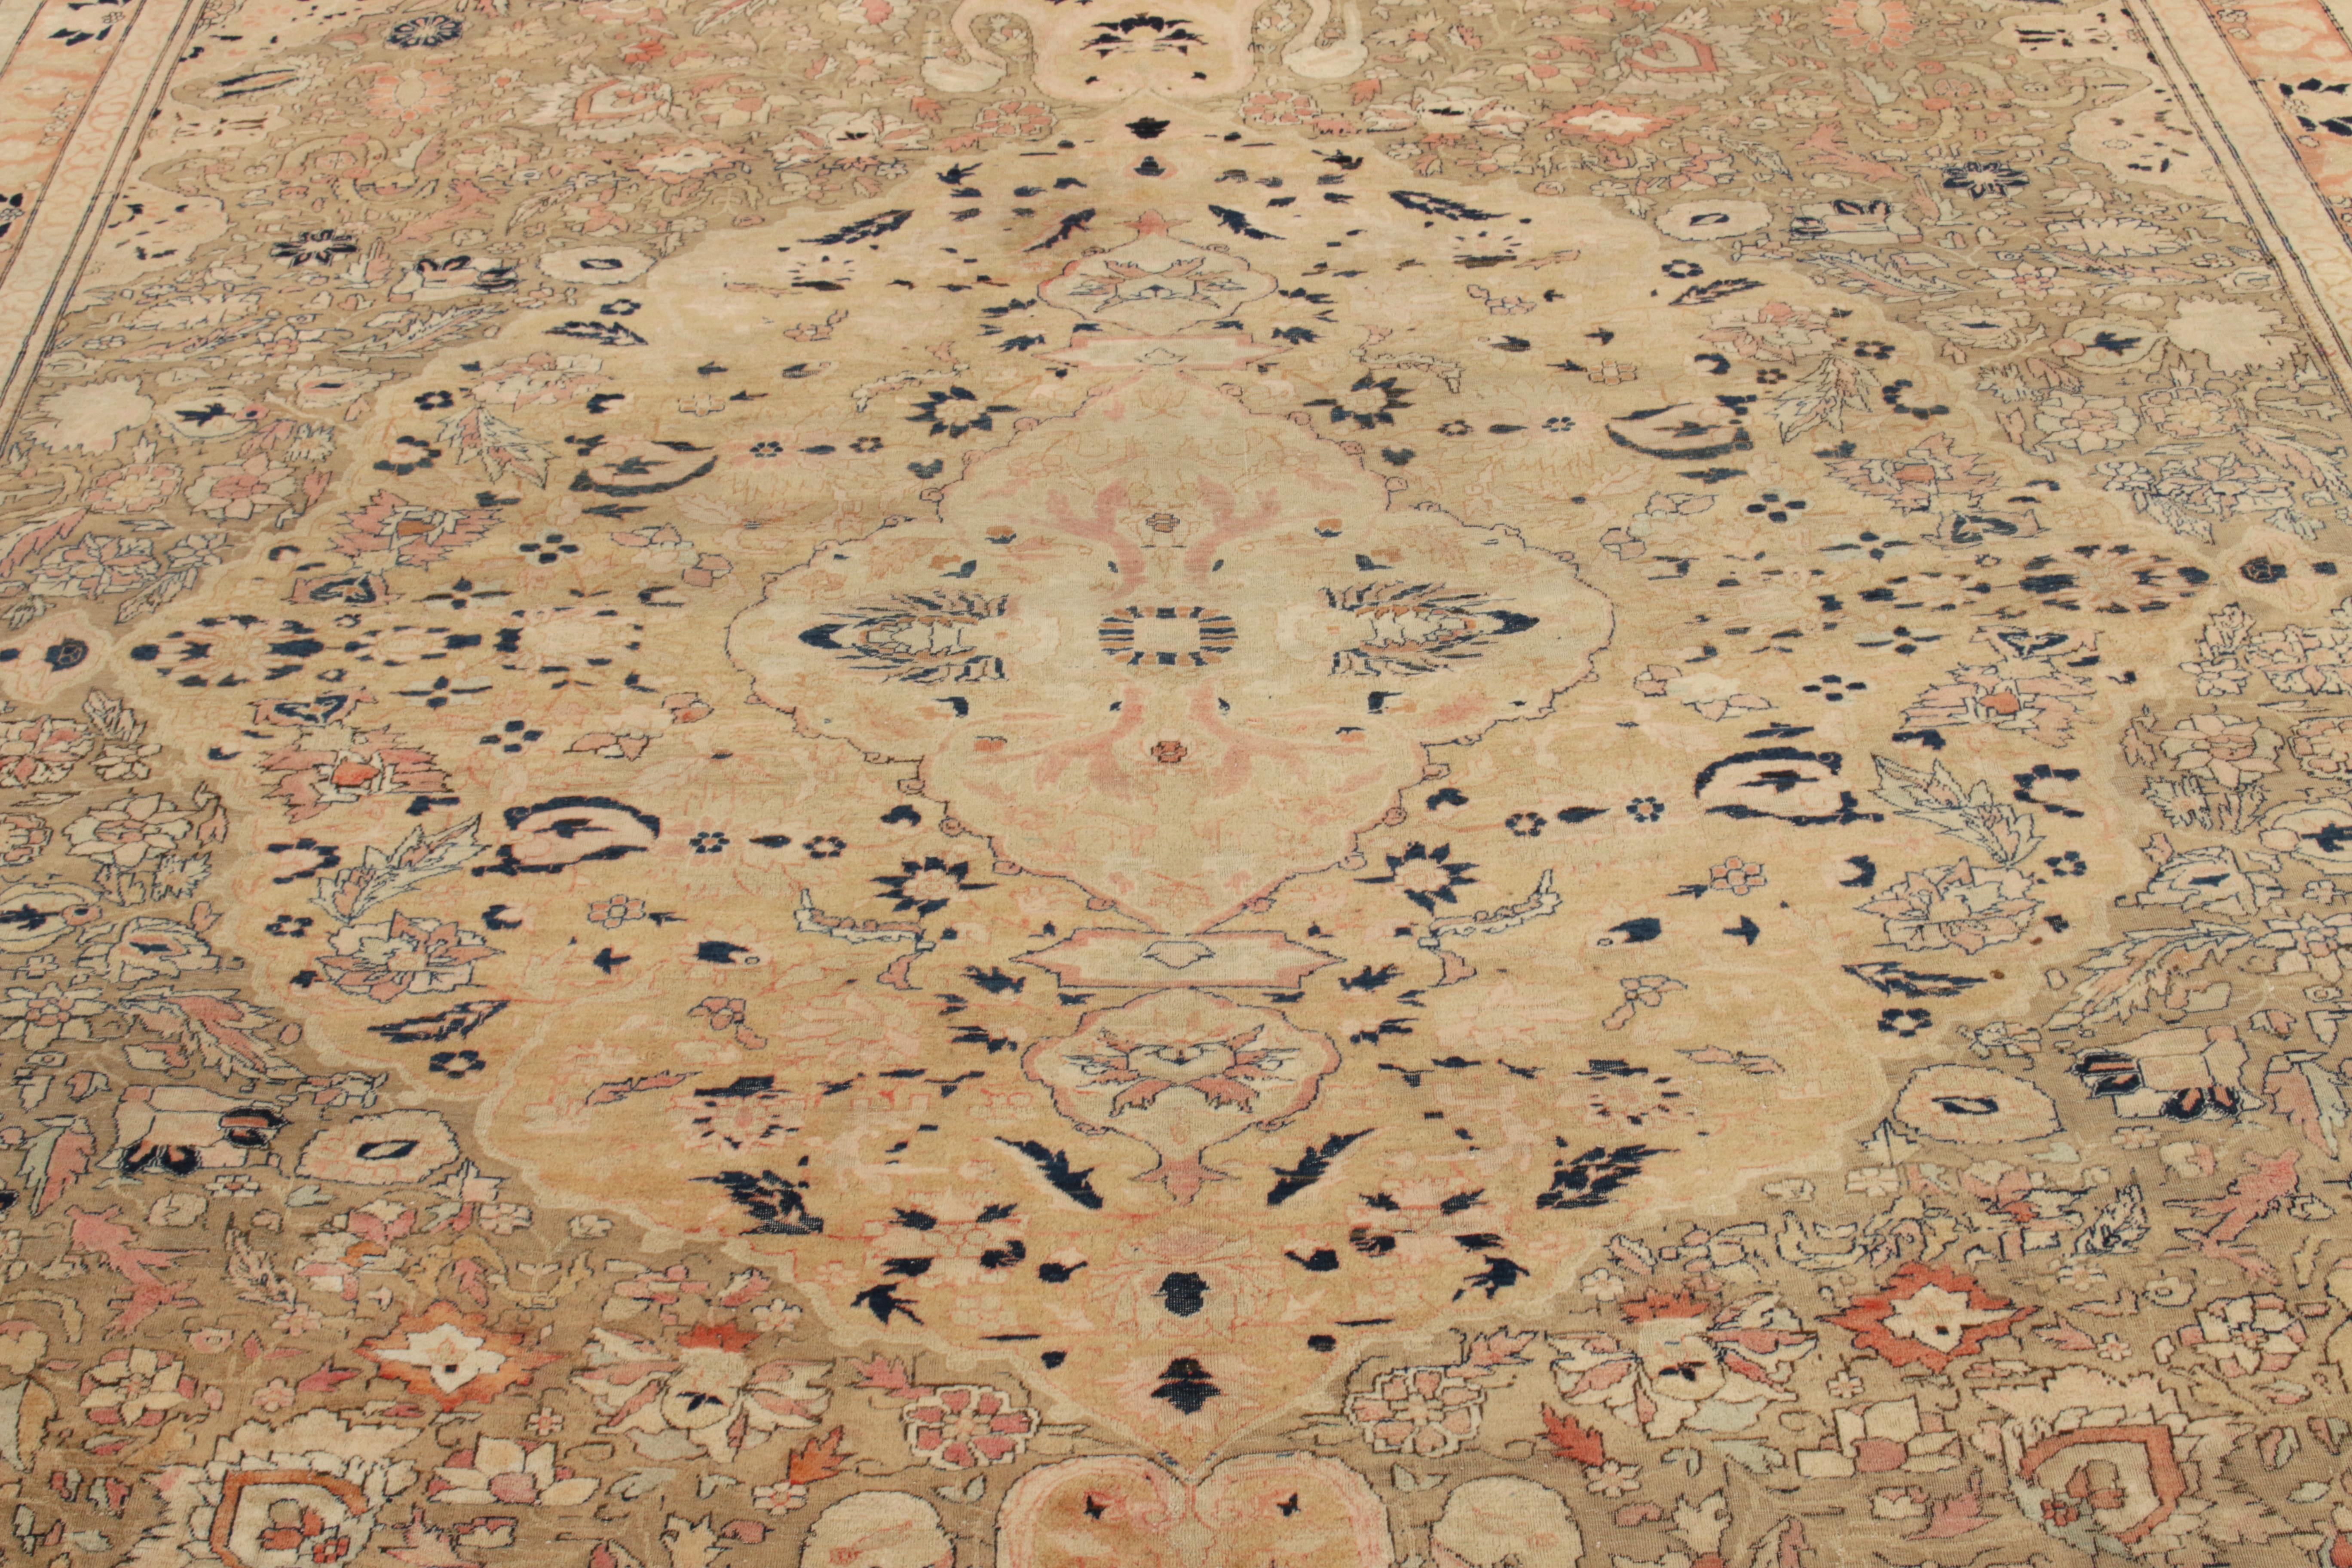 Hand-Knotted Antique Mohtashem Persian Rug in Beige-Brown, Red Medallion Pattern In Good Condition For Sale In Long Island City, NY